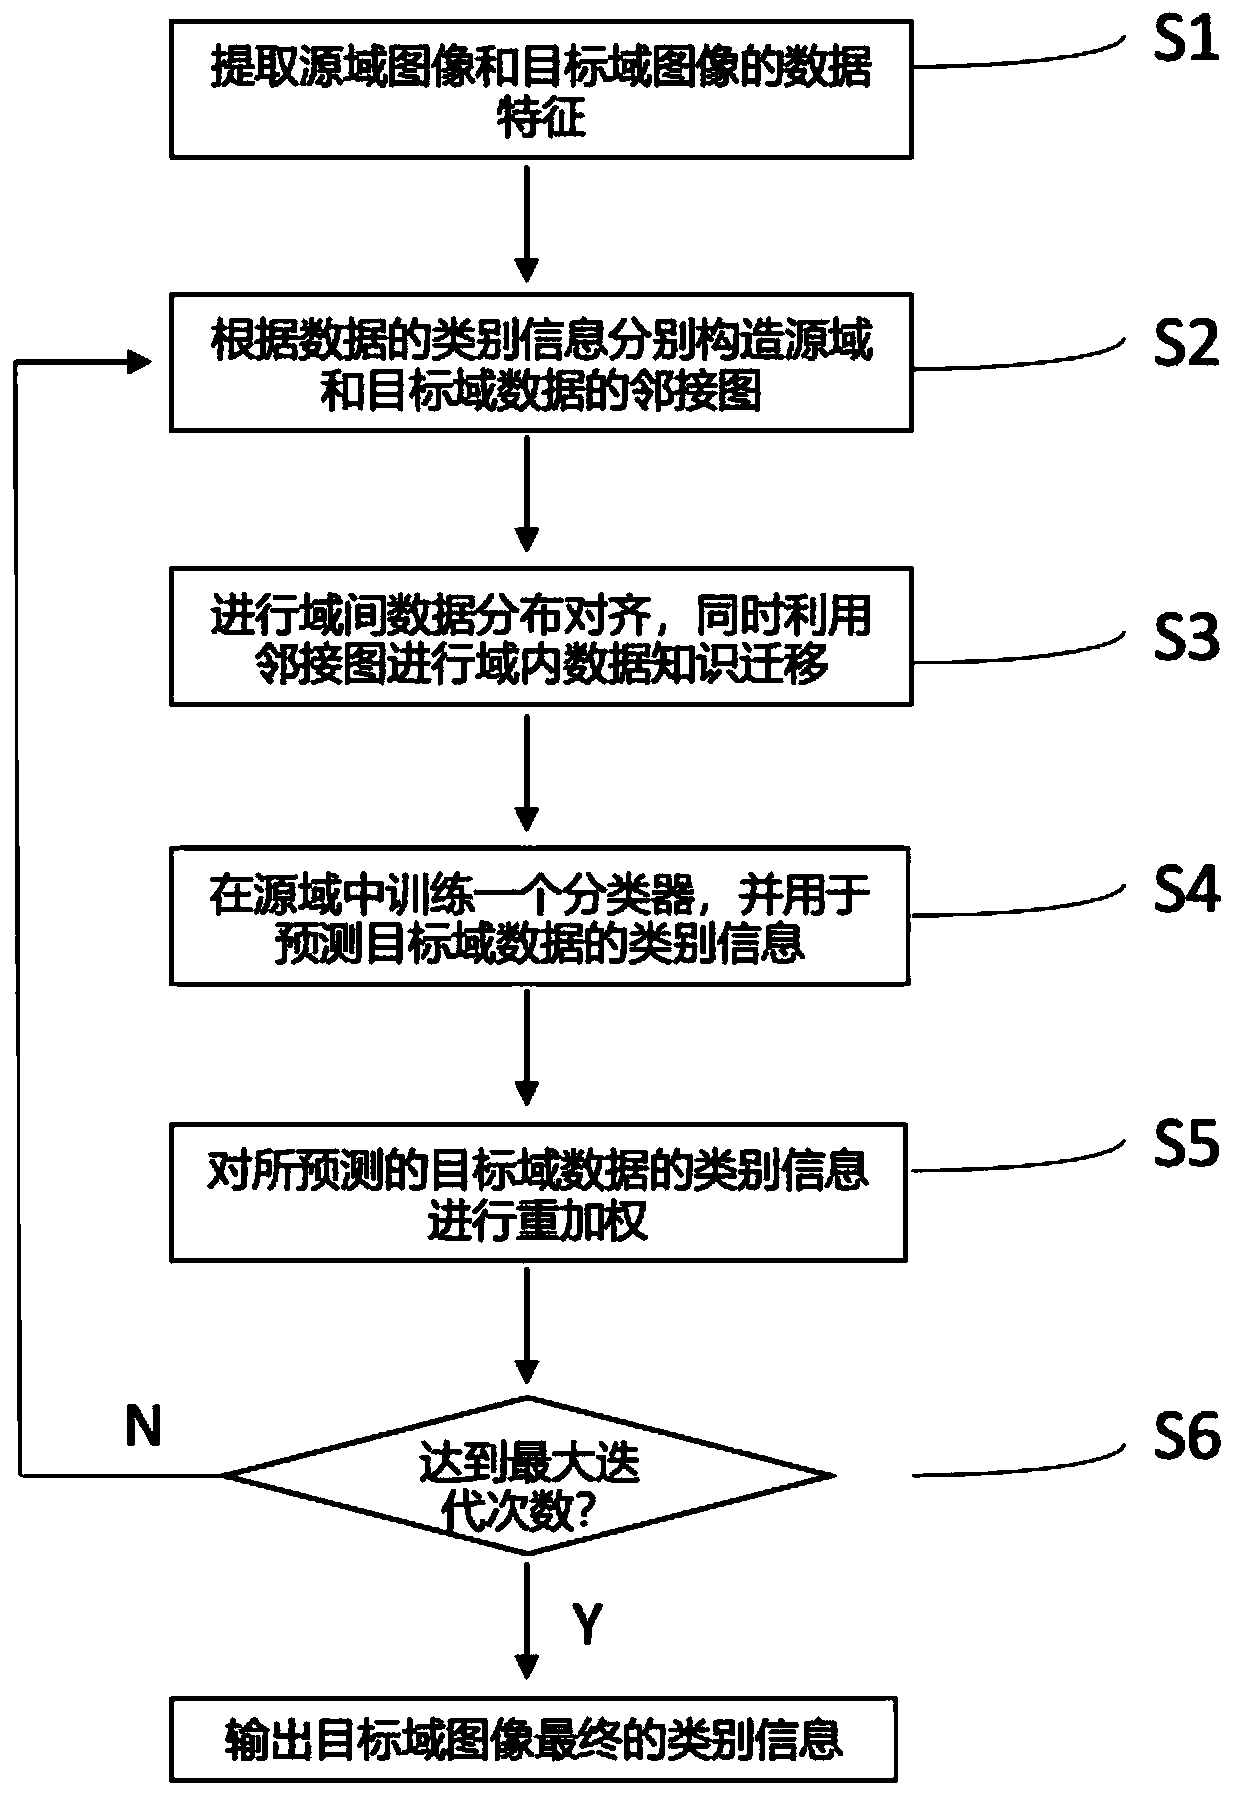 Cross-domain image classification method based on coupling knowledge migration